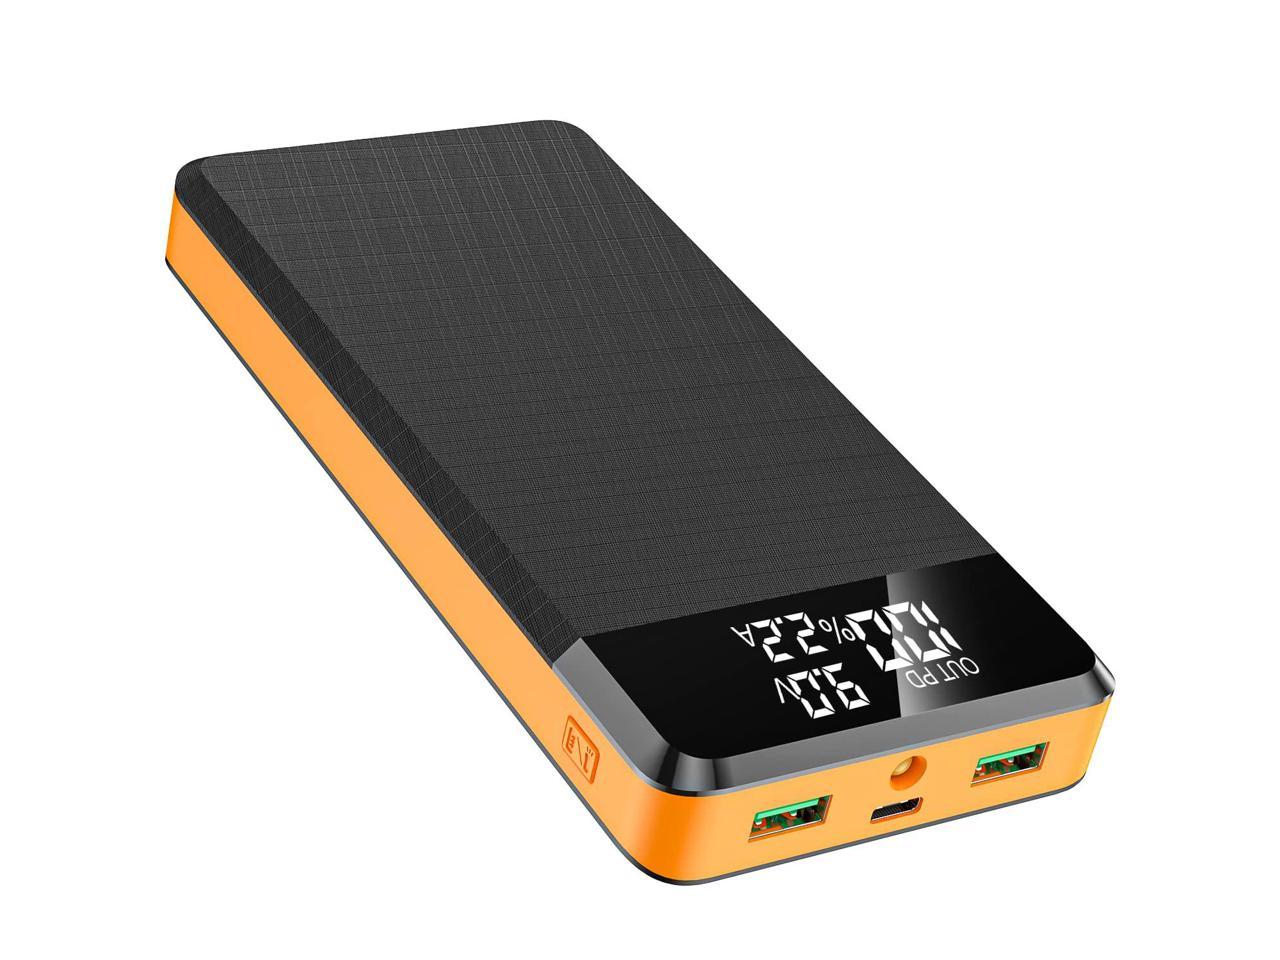 iPad and More USB C Portable Charger Power Bank 26800mAh PD 18W QC 3.0 Fast Charging High-Capacity External Battery Tri-input and Tri-output Cell Phone Charger with LED Display for iPhone Huawei